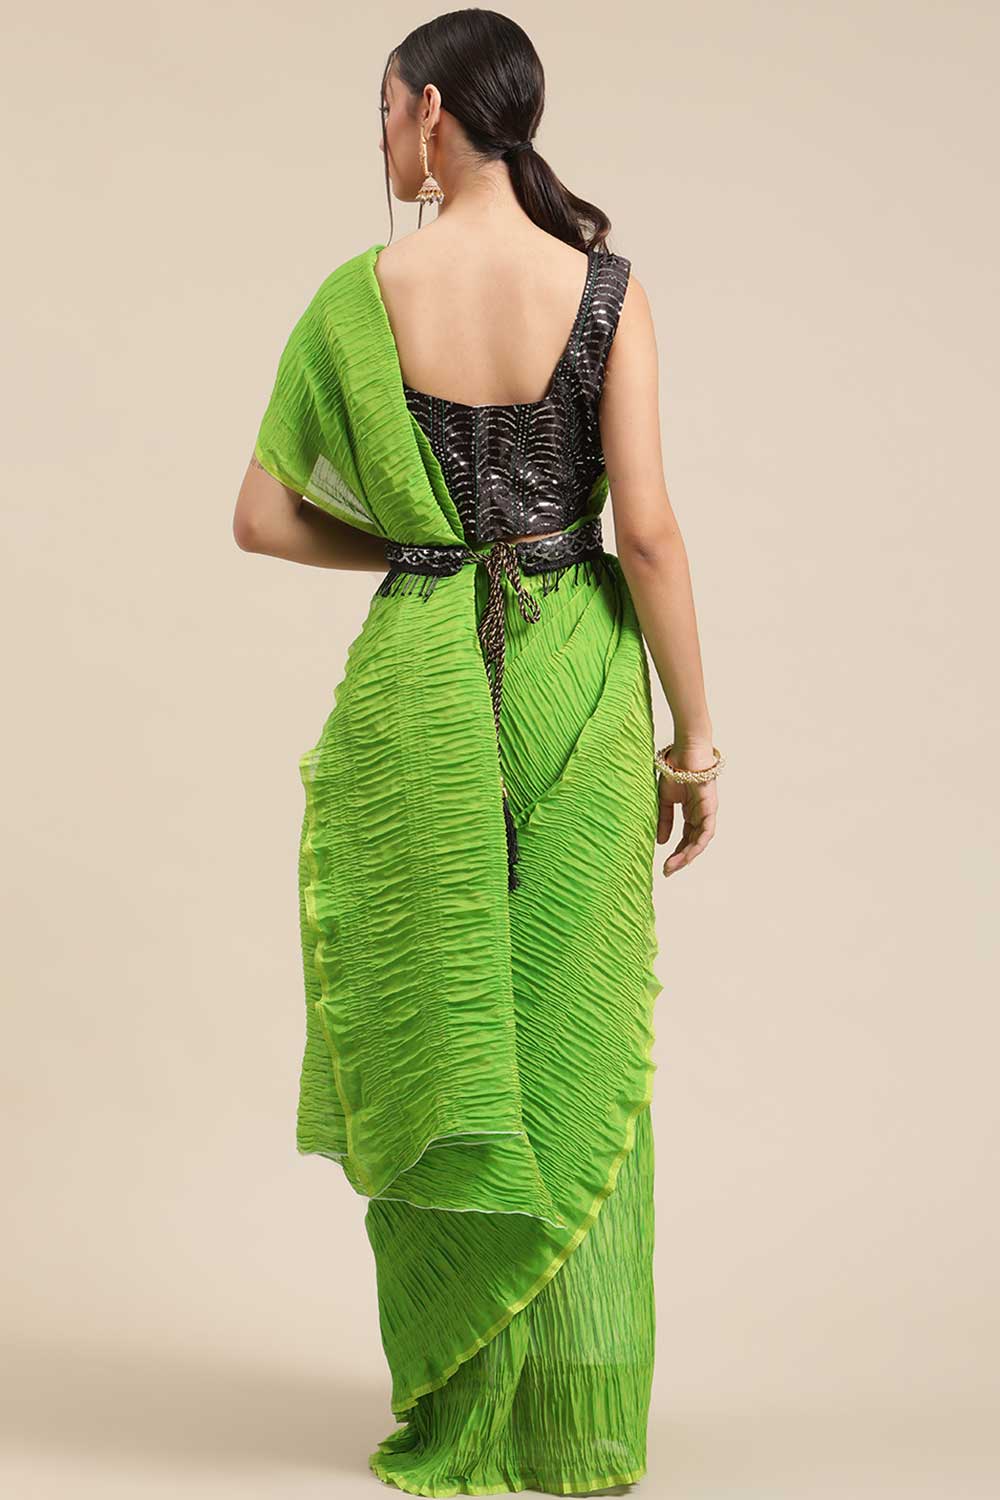 Buy Polycotton Solid Saree in Green Online - Back